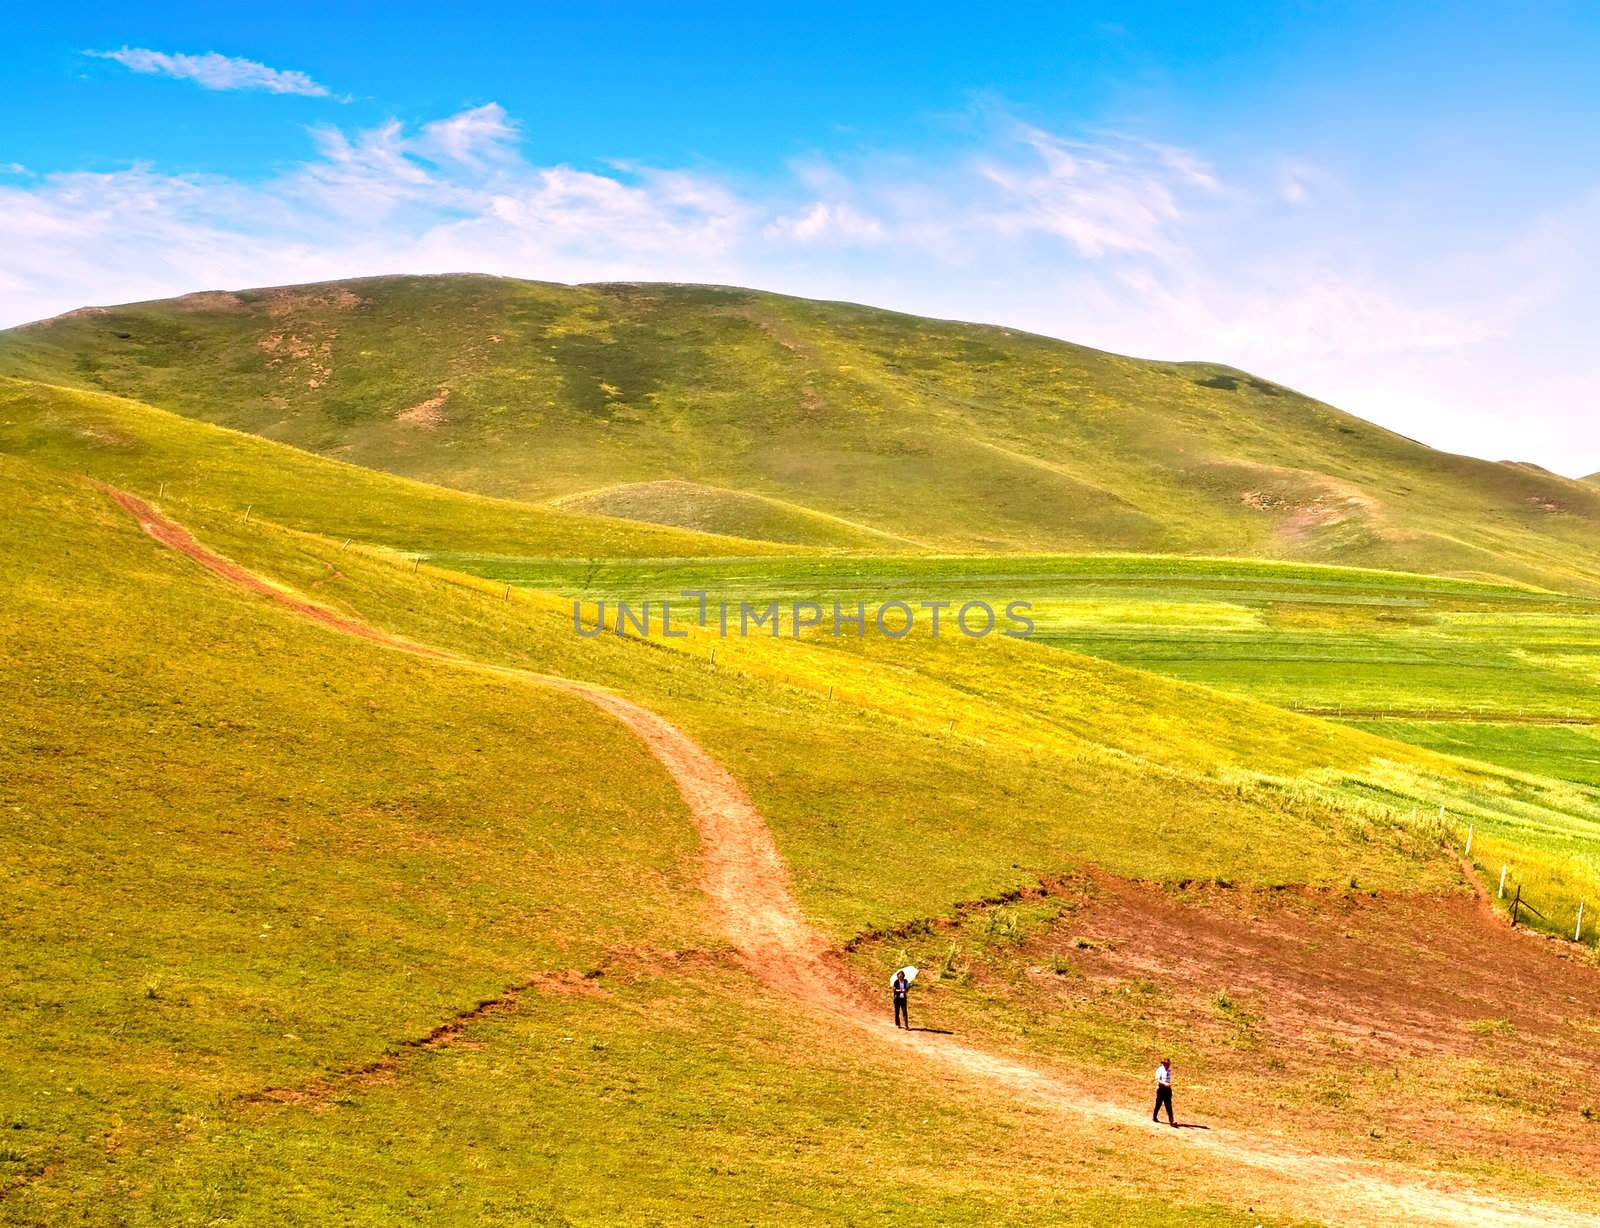 Landscape photo of pepole walking along a road in colorful plain and hills